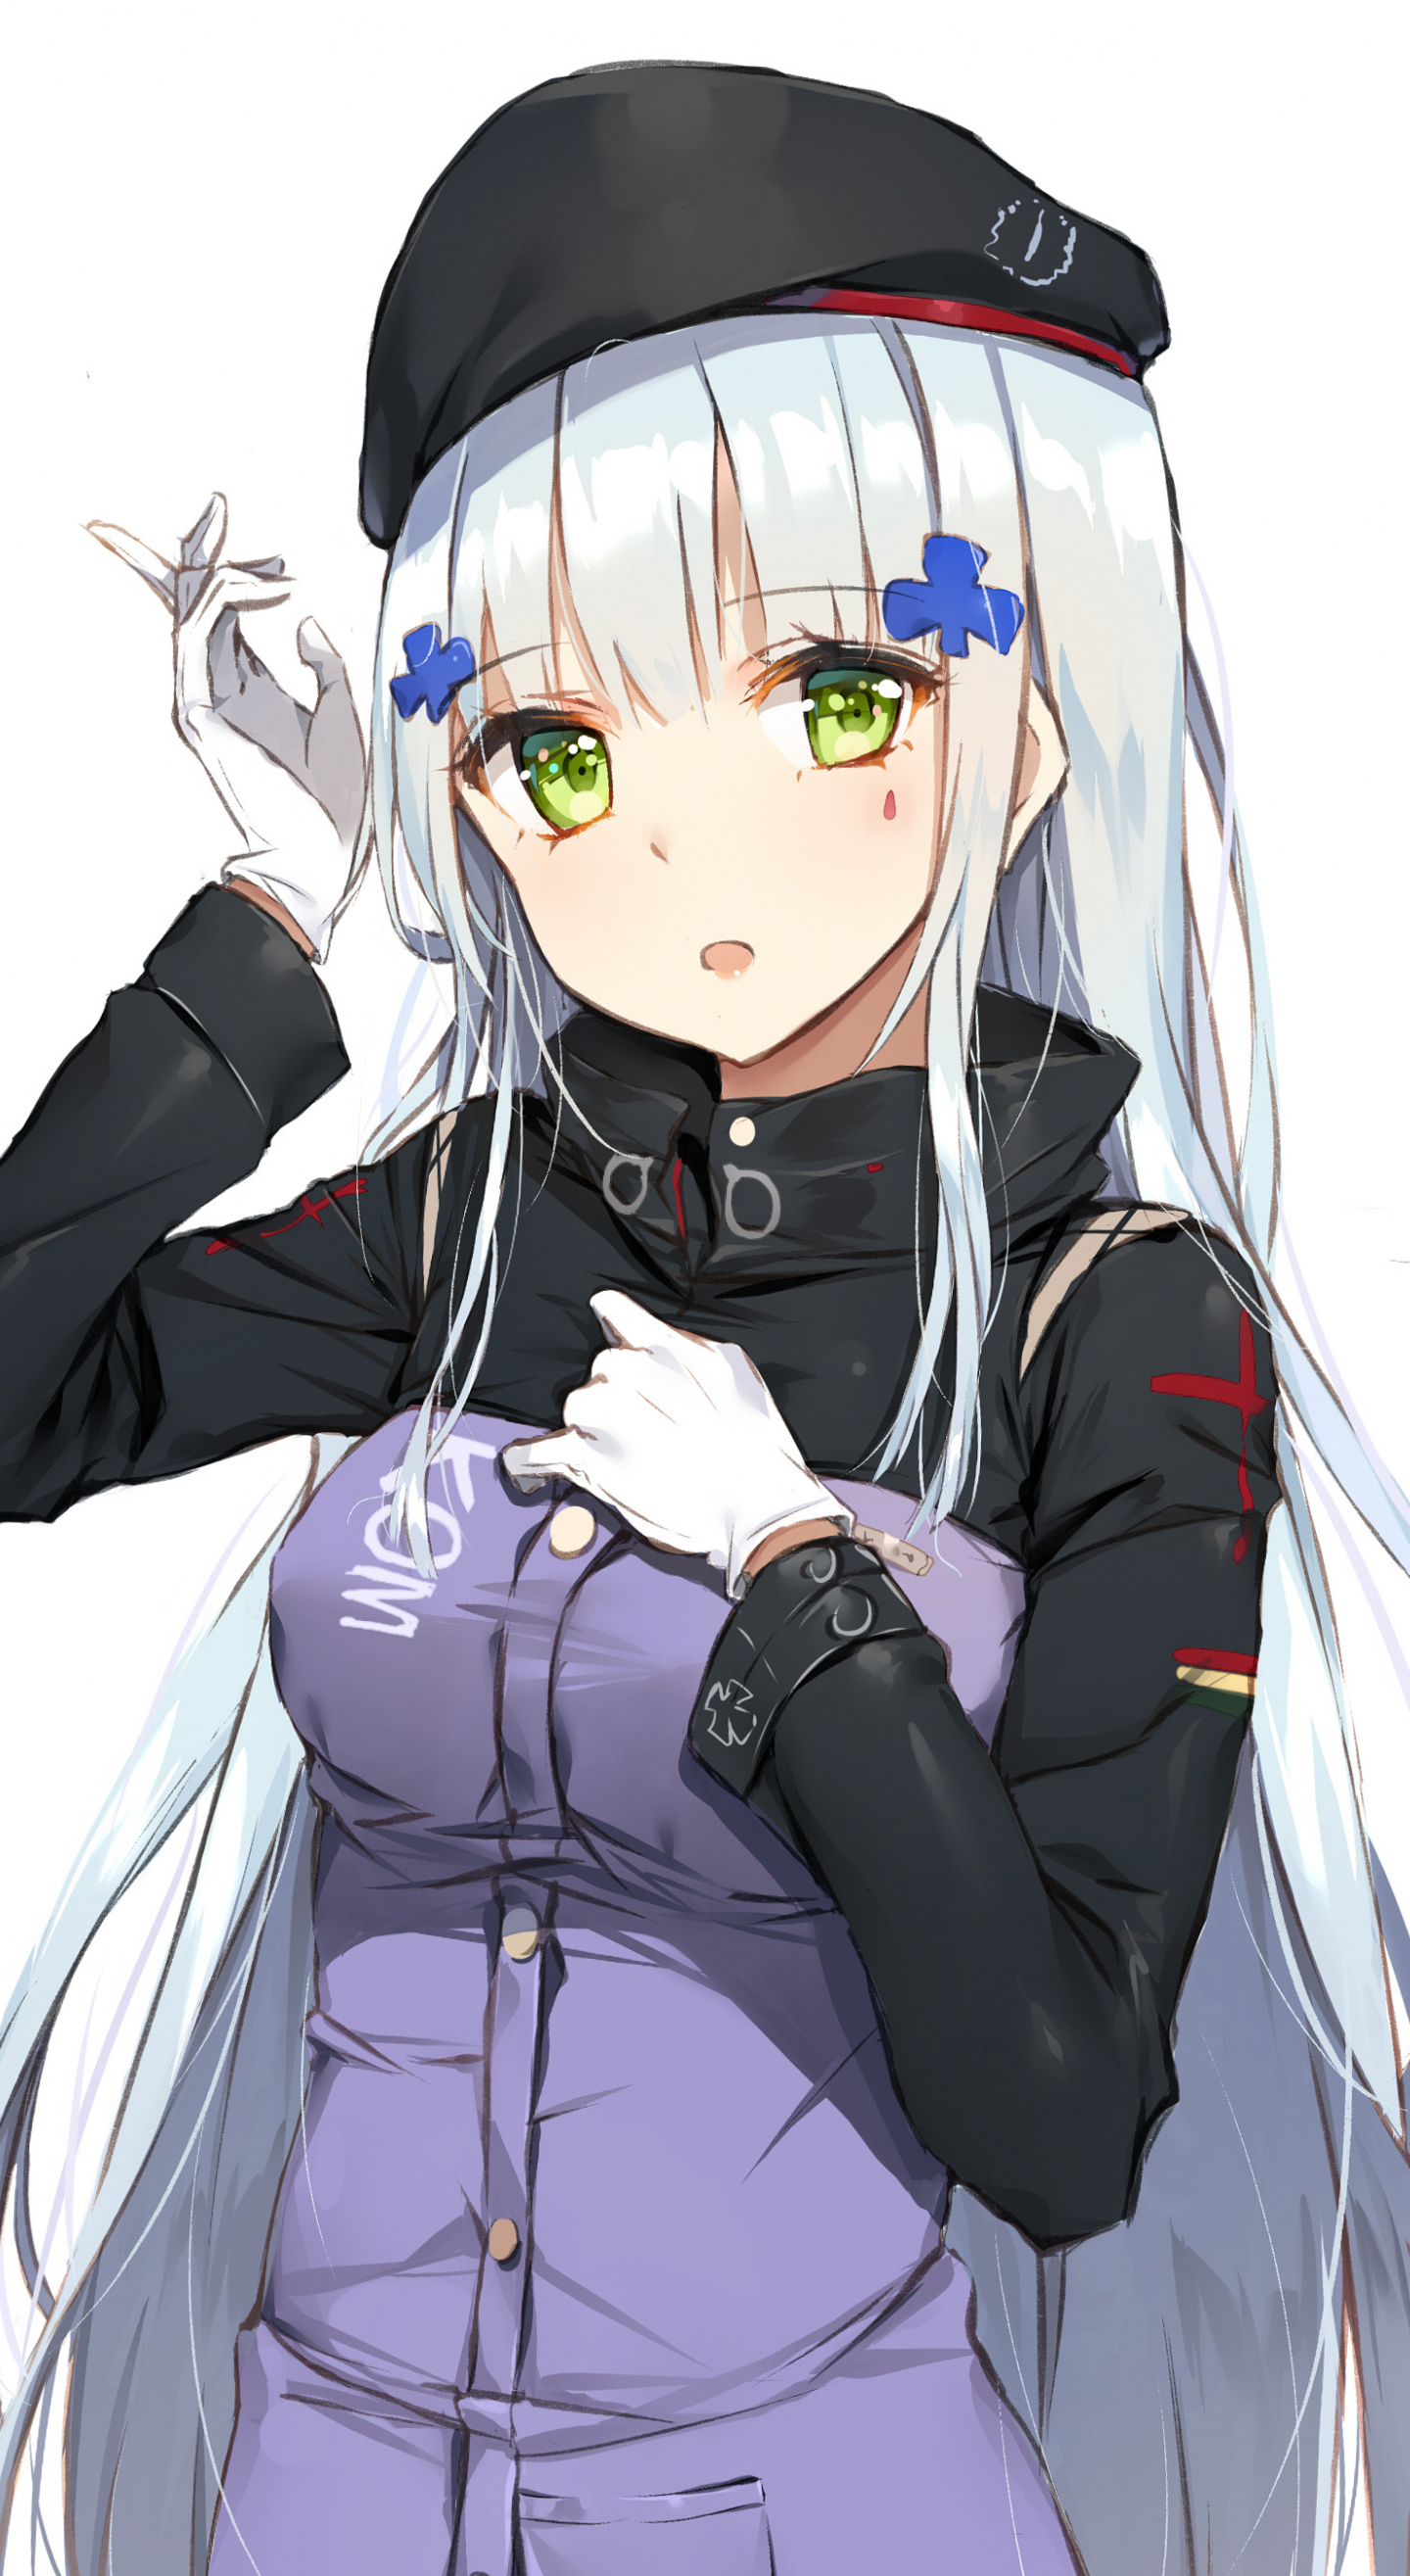 HK 416 Wallpaper, now with extra pic rails : r/girlsfrontline